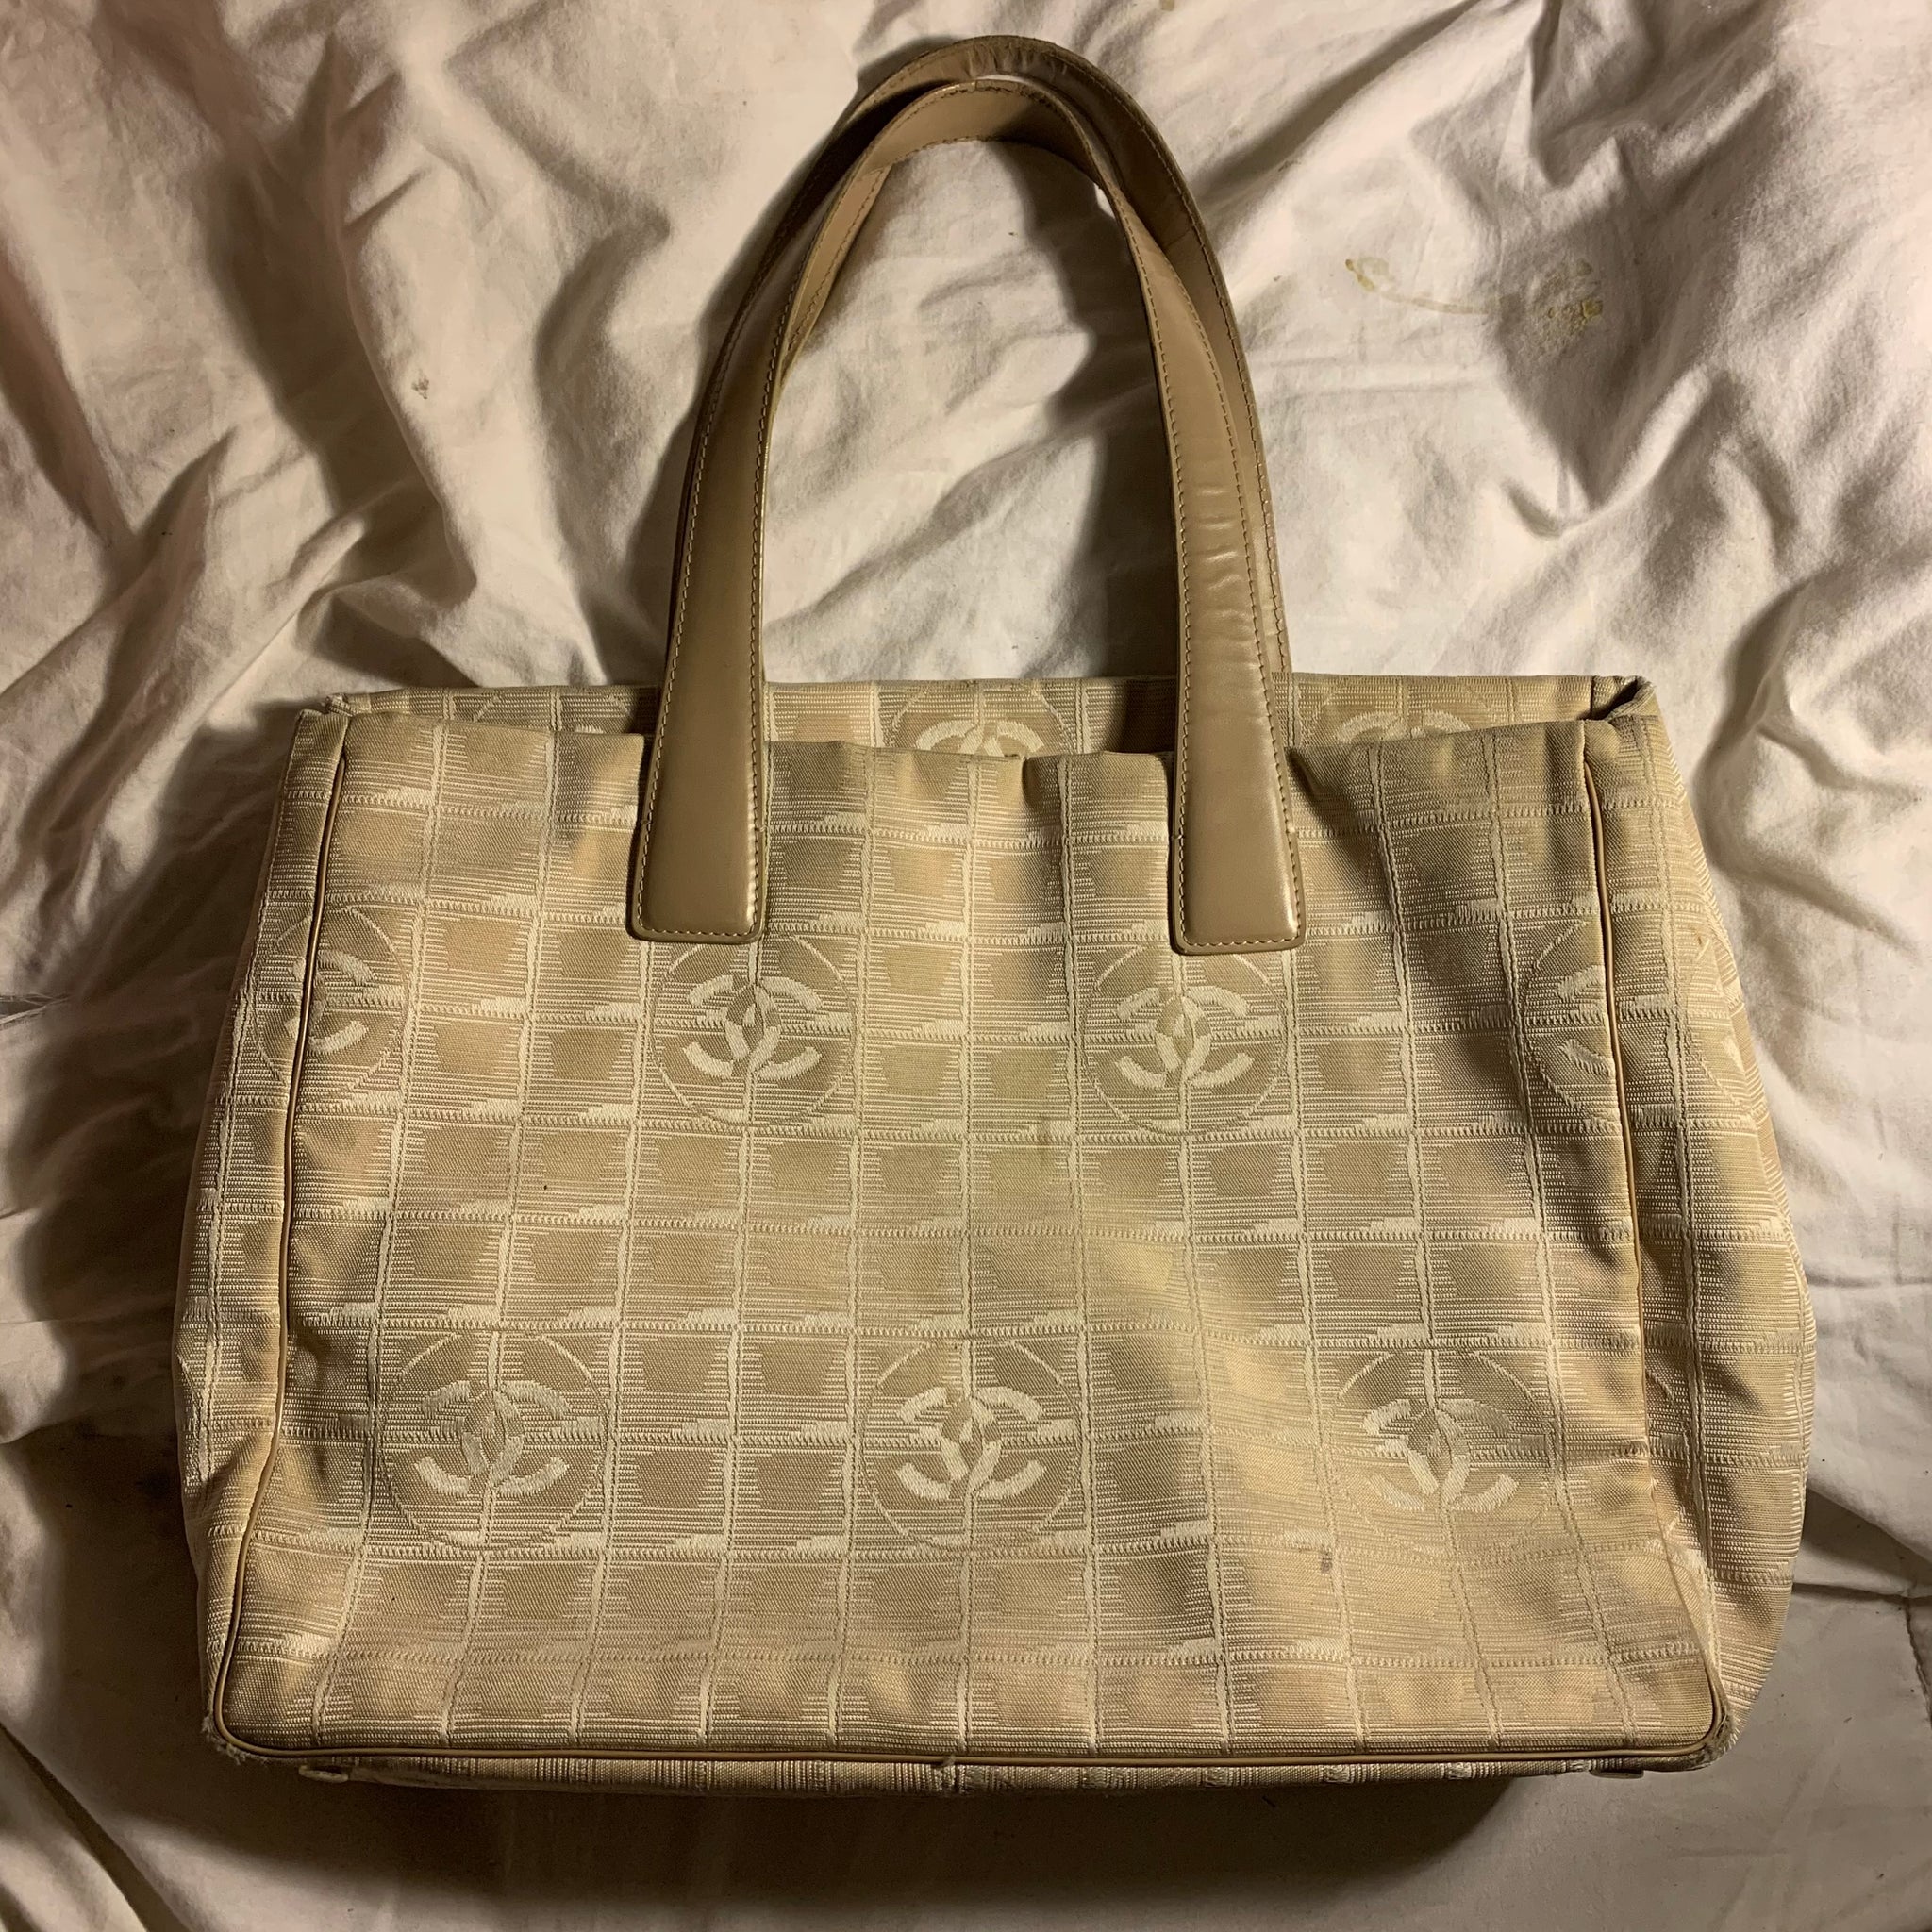 Authentic Chanel Shopper Tote Bag - clothing & accessories - by